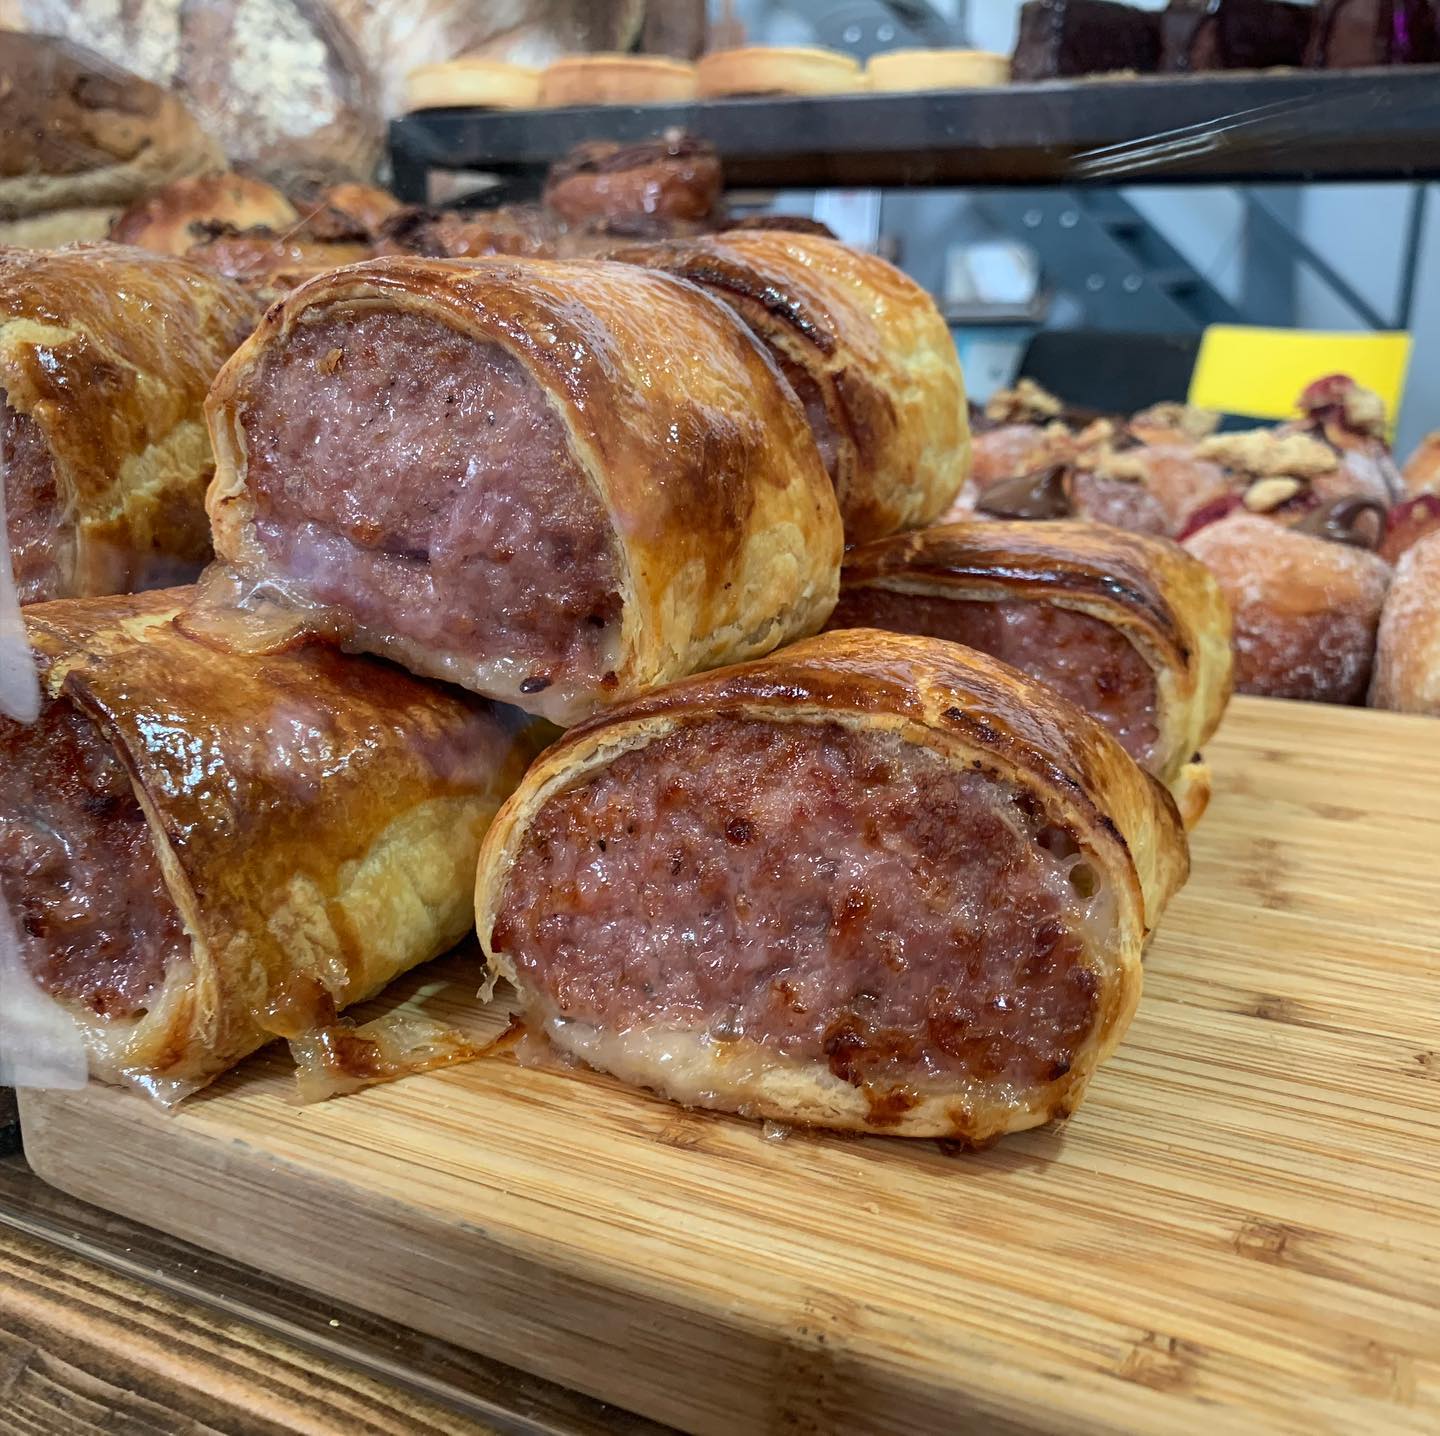 The BEST Sausage Rolls in TOWN! You don't want to miss out!!!